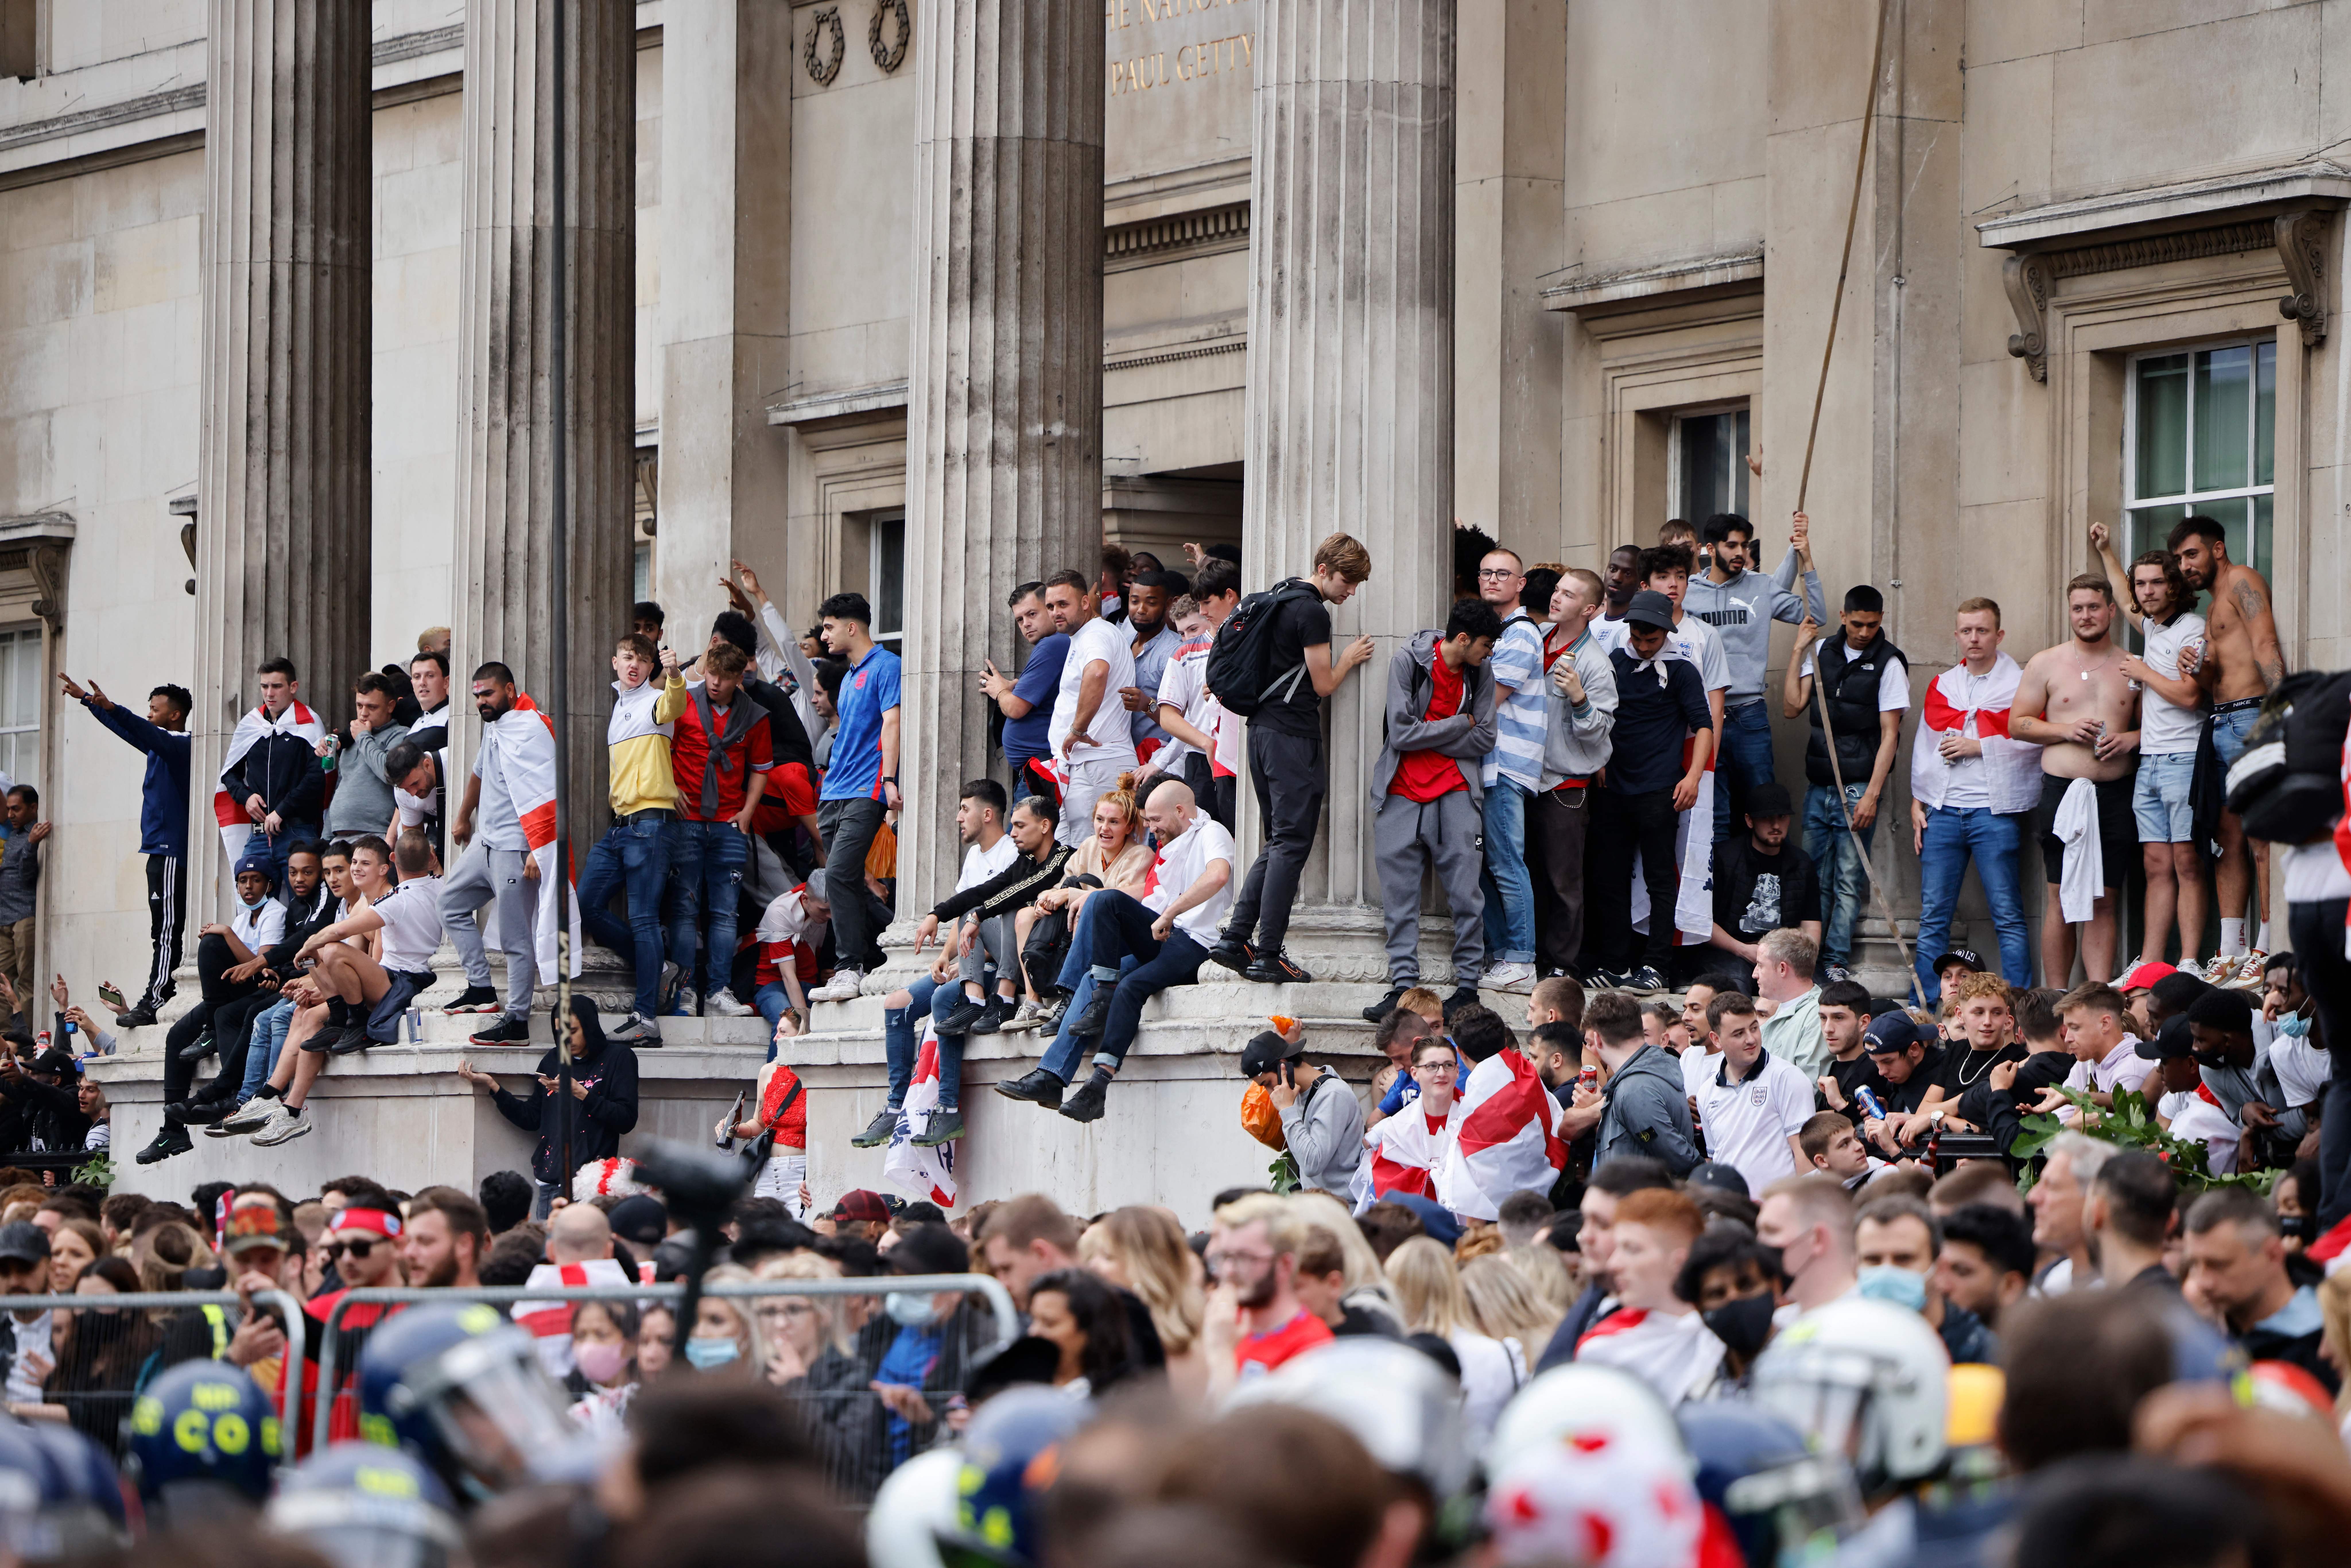 Fans sit outside the national Gallery in Trafalgar Square during Euro 2020